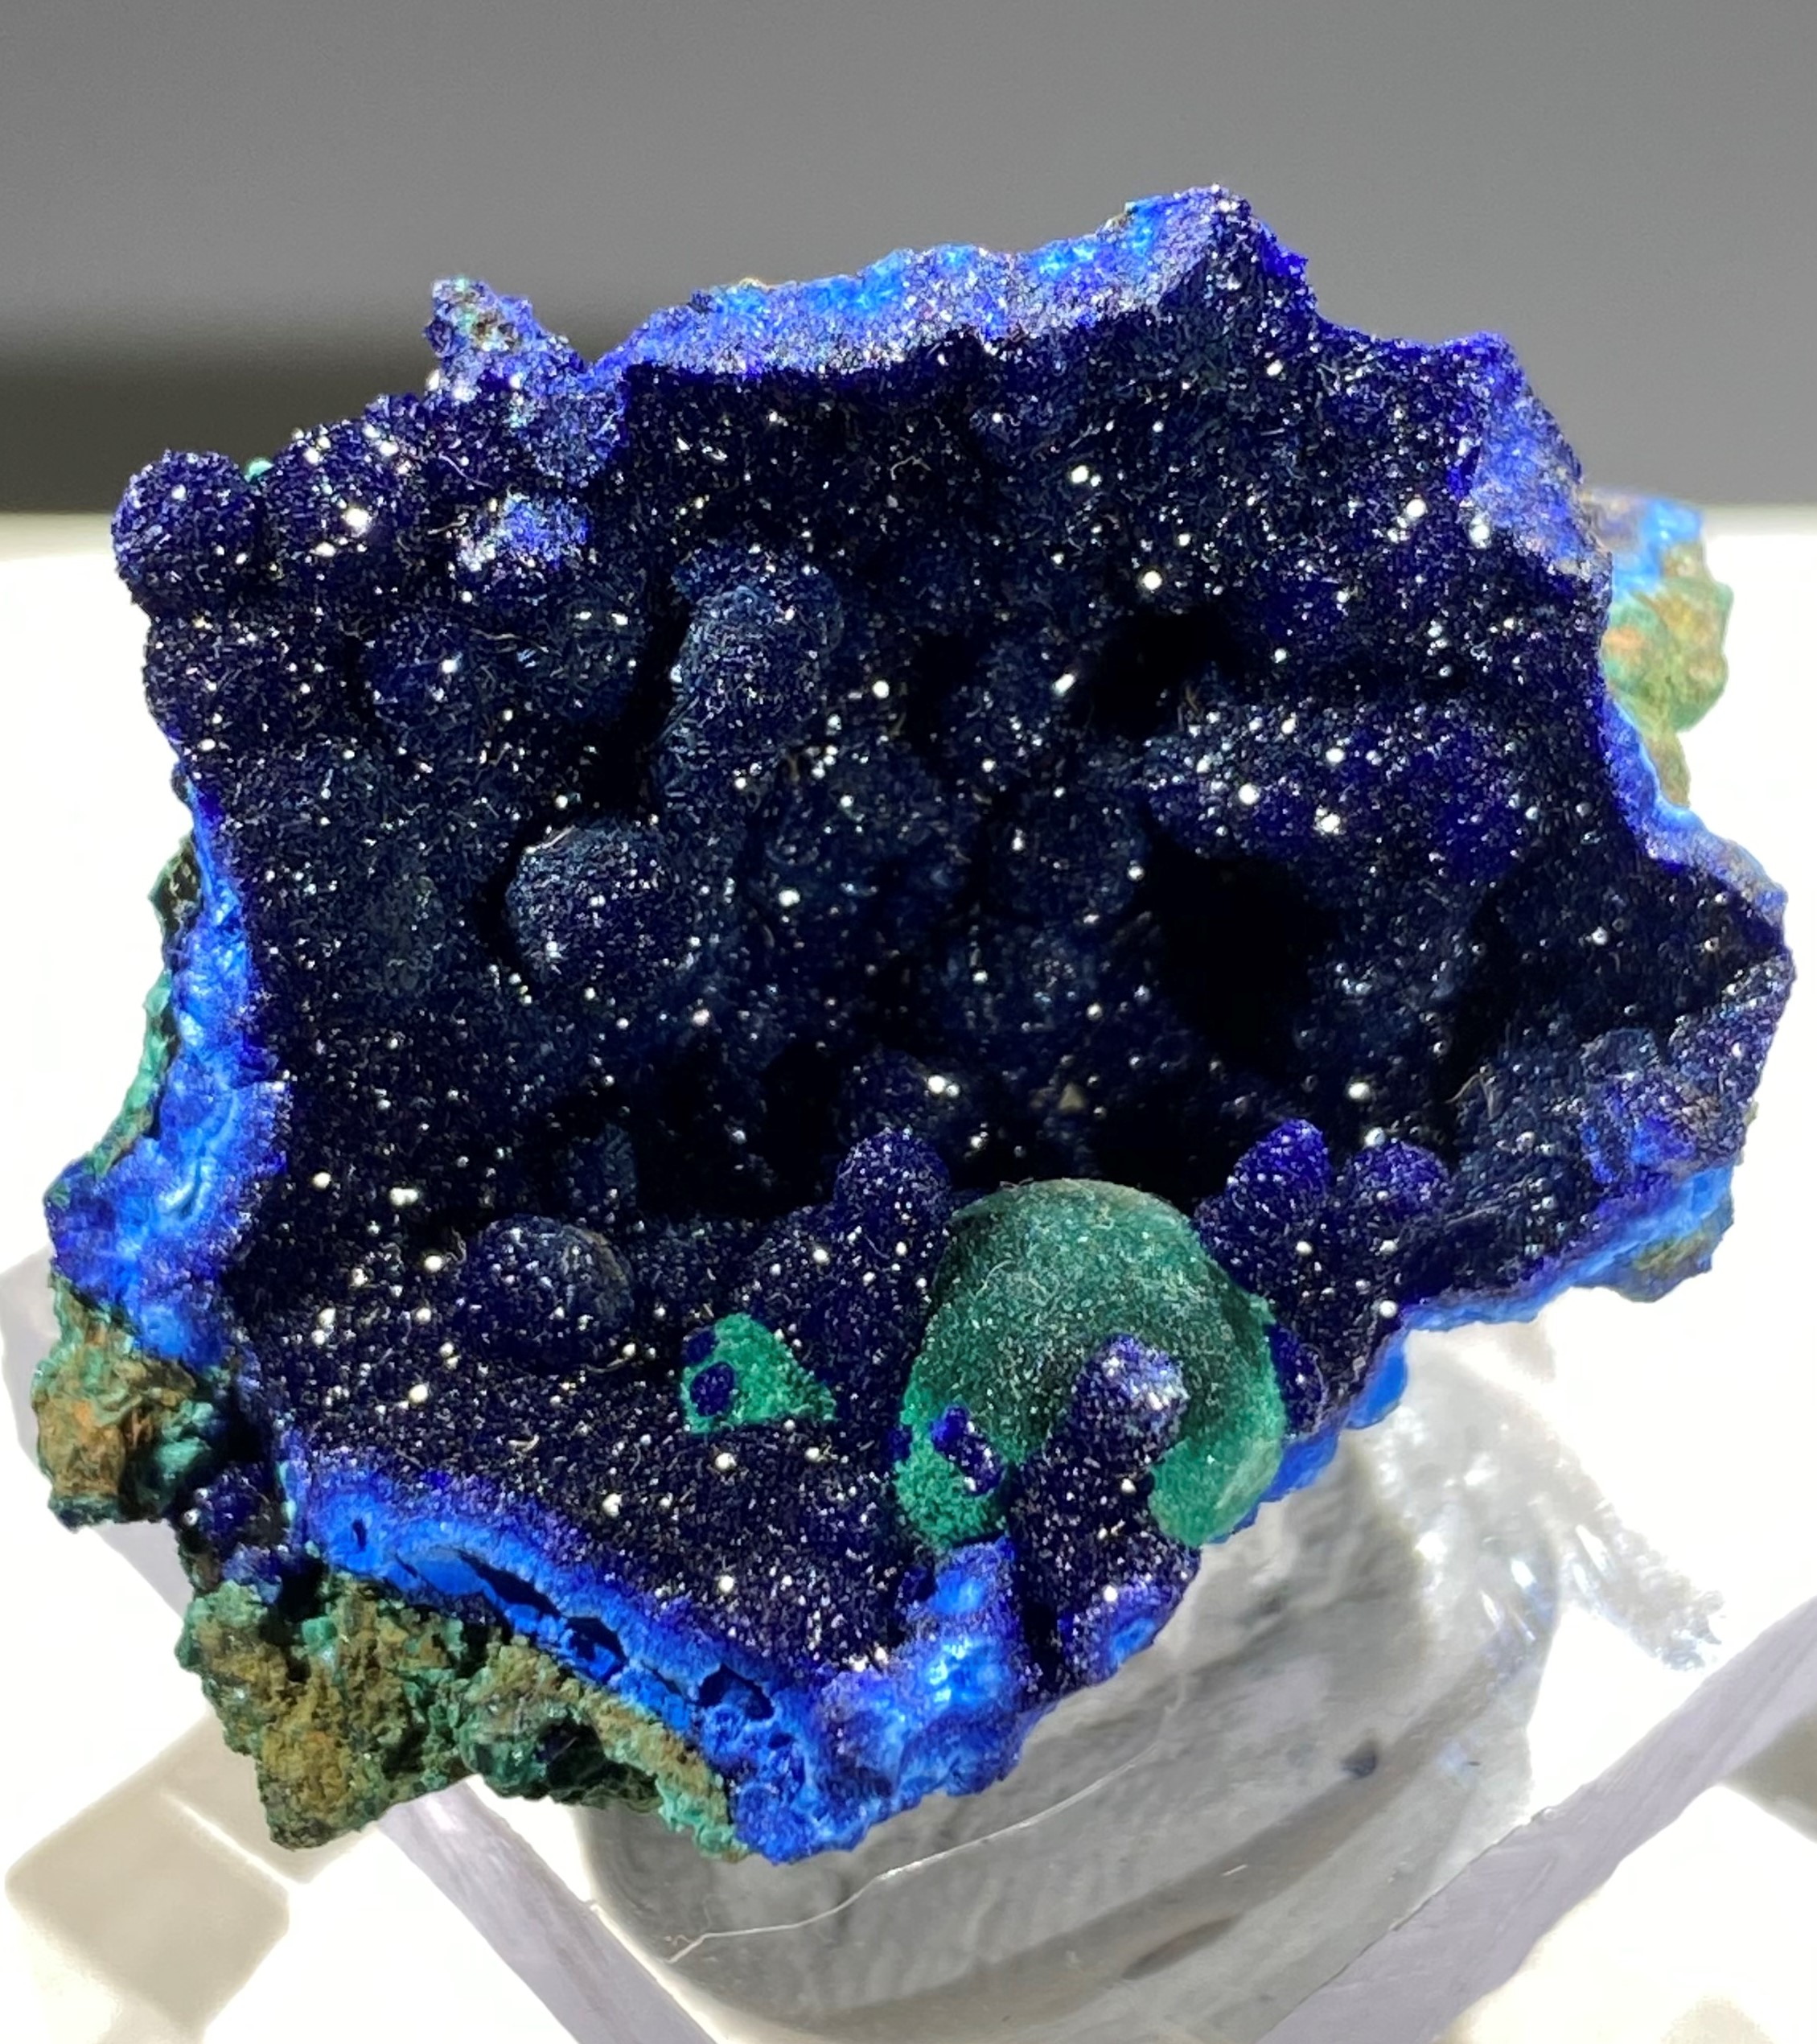 Very Rare /& Gorgeous Azurite Malachite Rough High Qualitzn,Natural Loose Gemstone 1060Cts. Rare Collection Of Only Two Piece